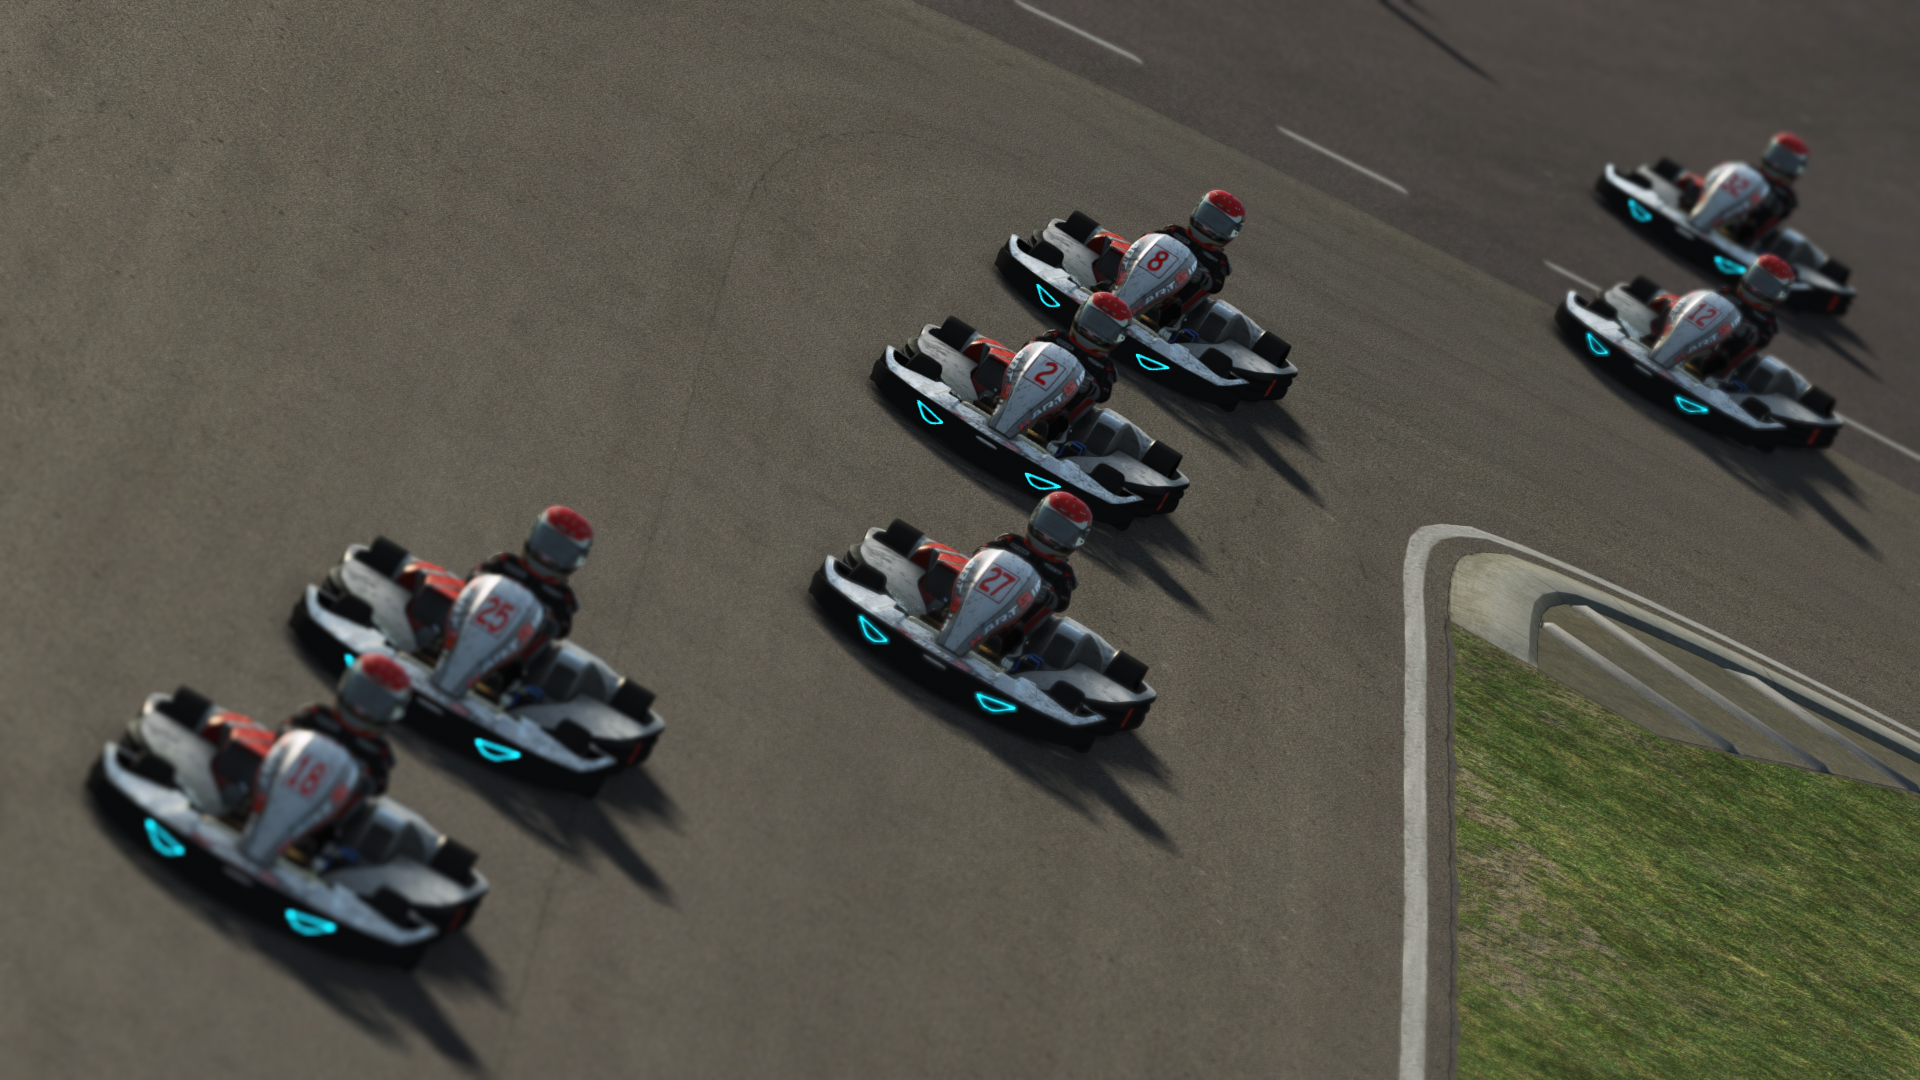 rfactor 2 track pack